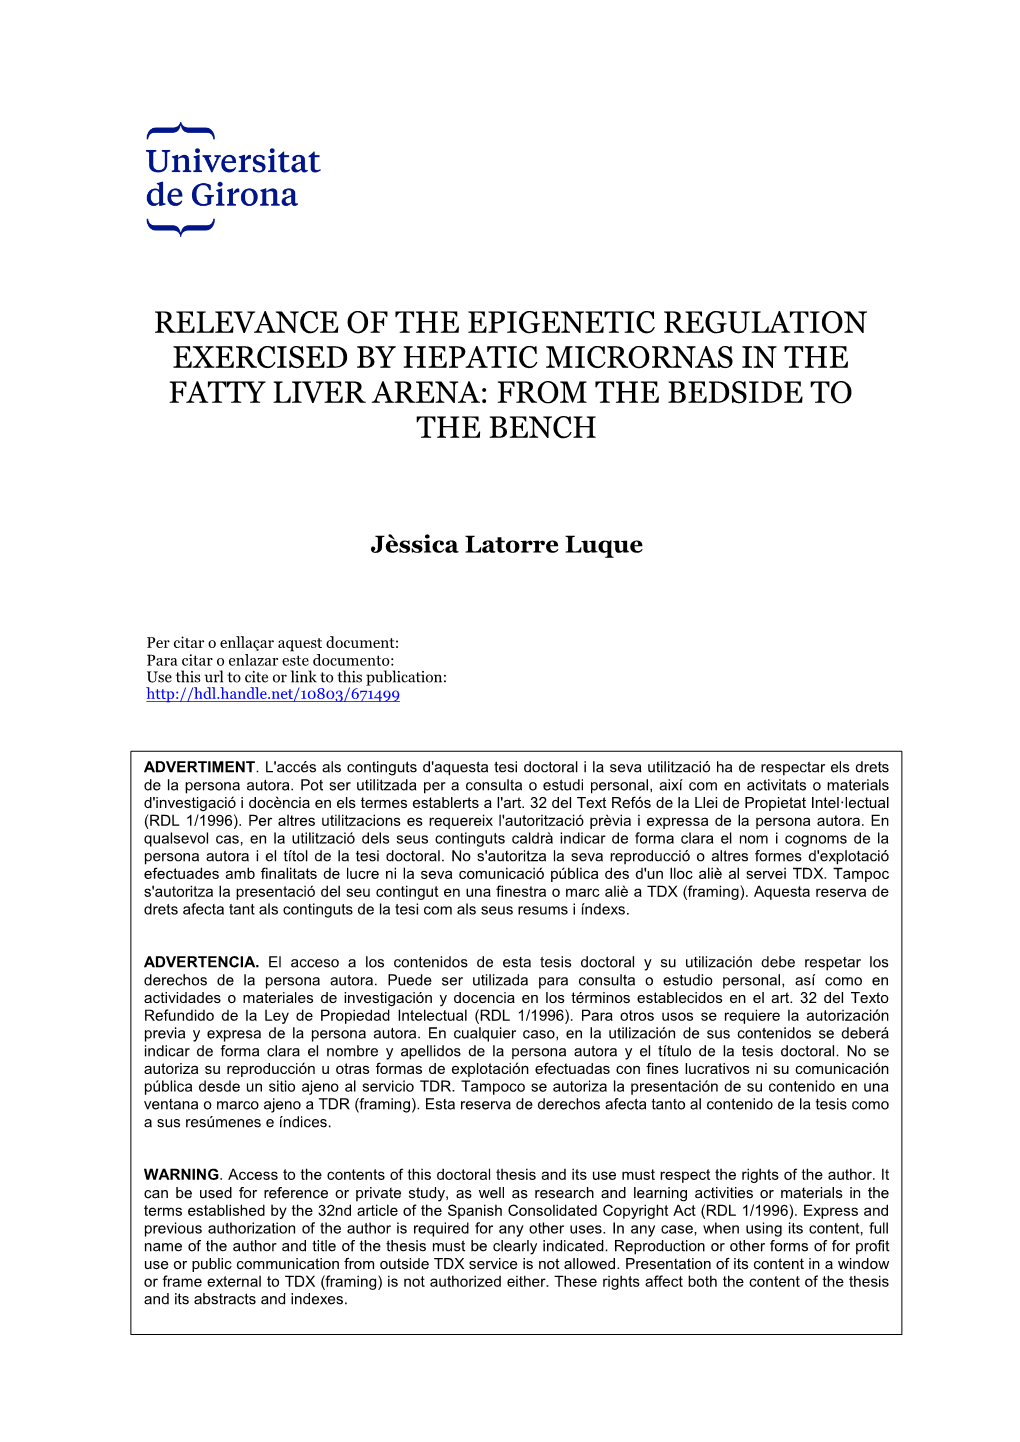 Relevance of the Epigenetic Regulation Exercised by Hepatic Micrornas in the Fatty Liver Arena: from the Bedside to the Bench